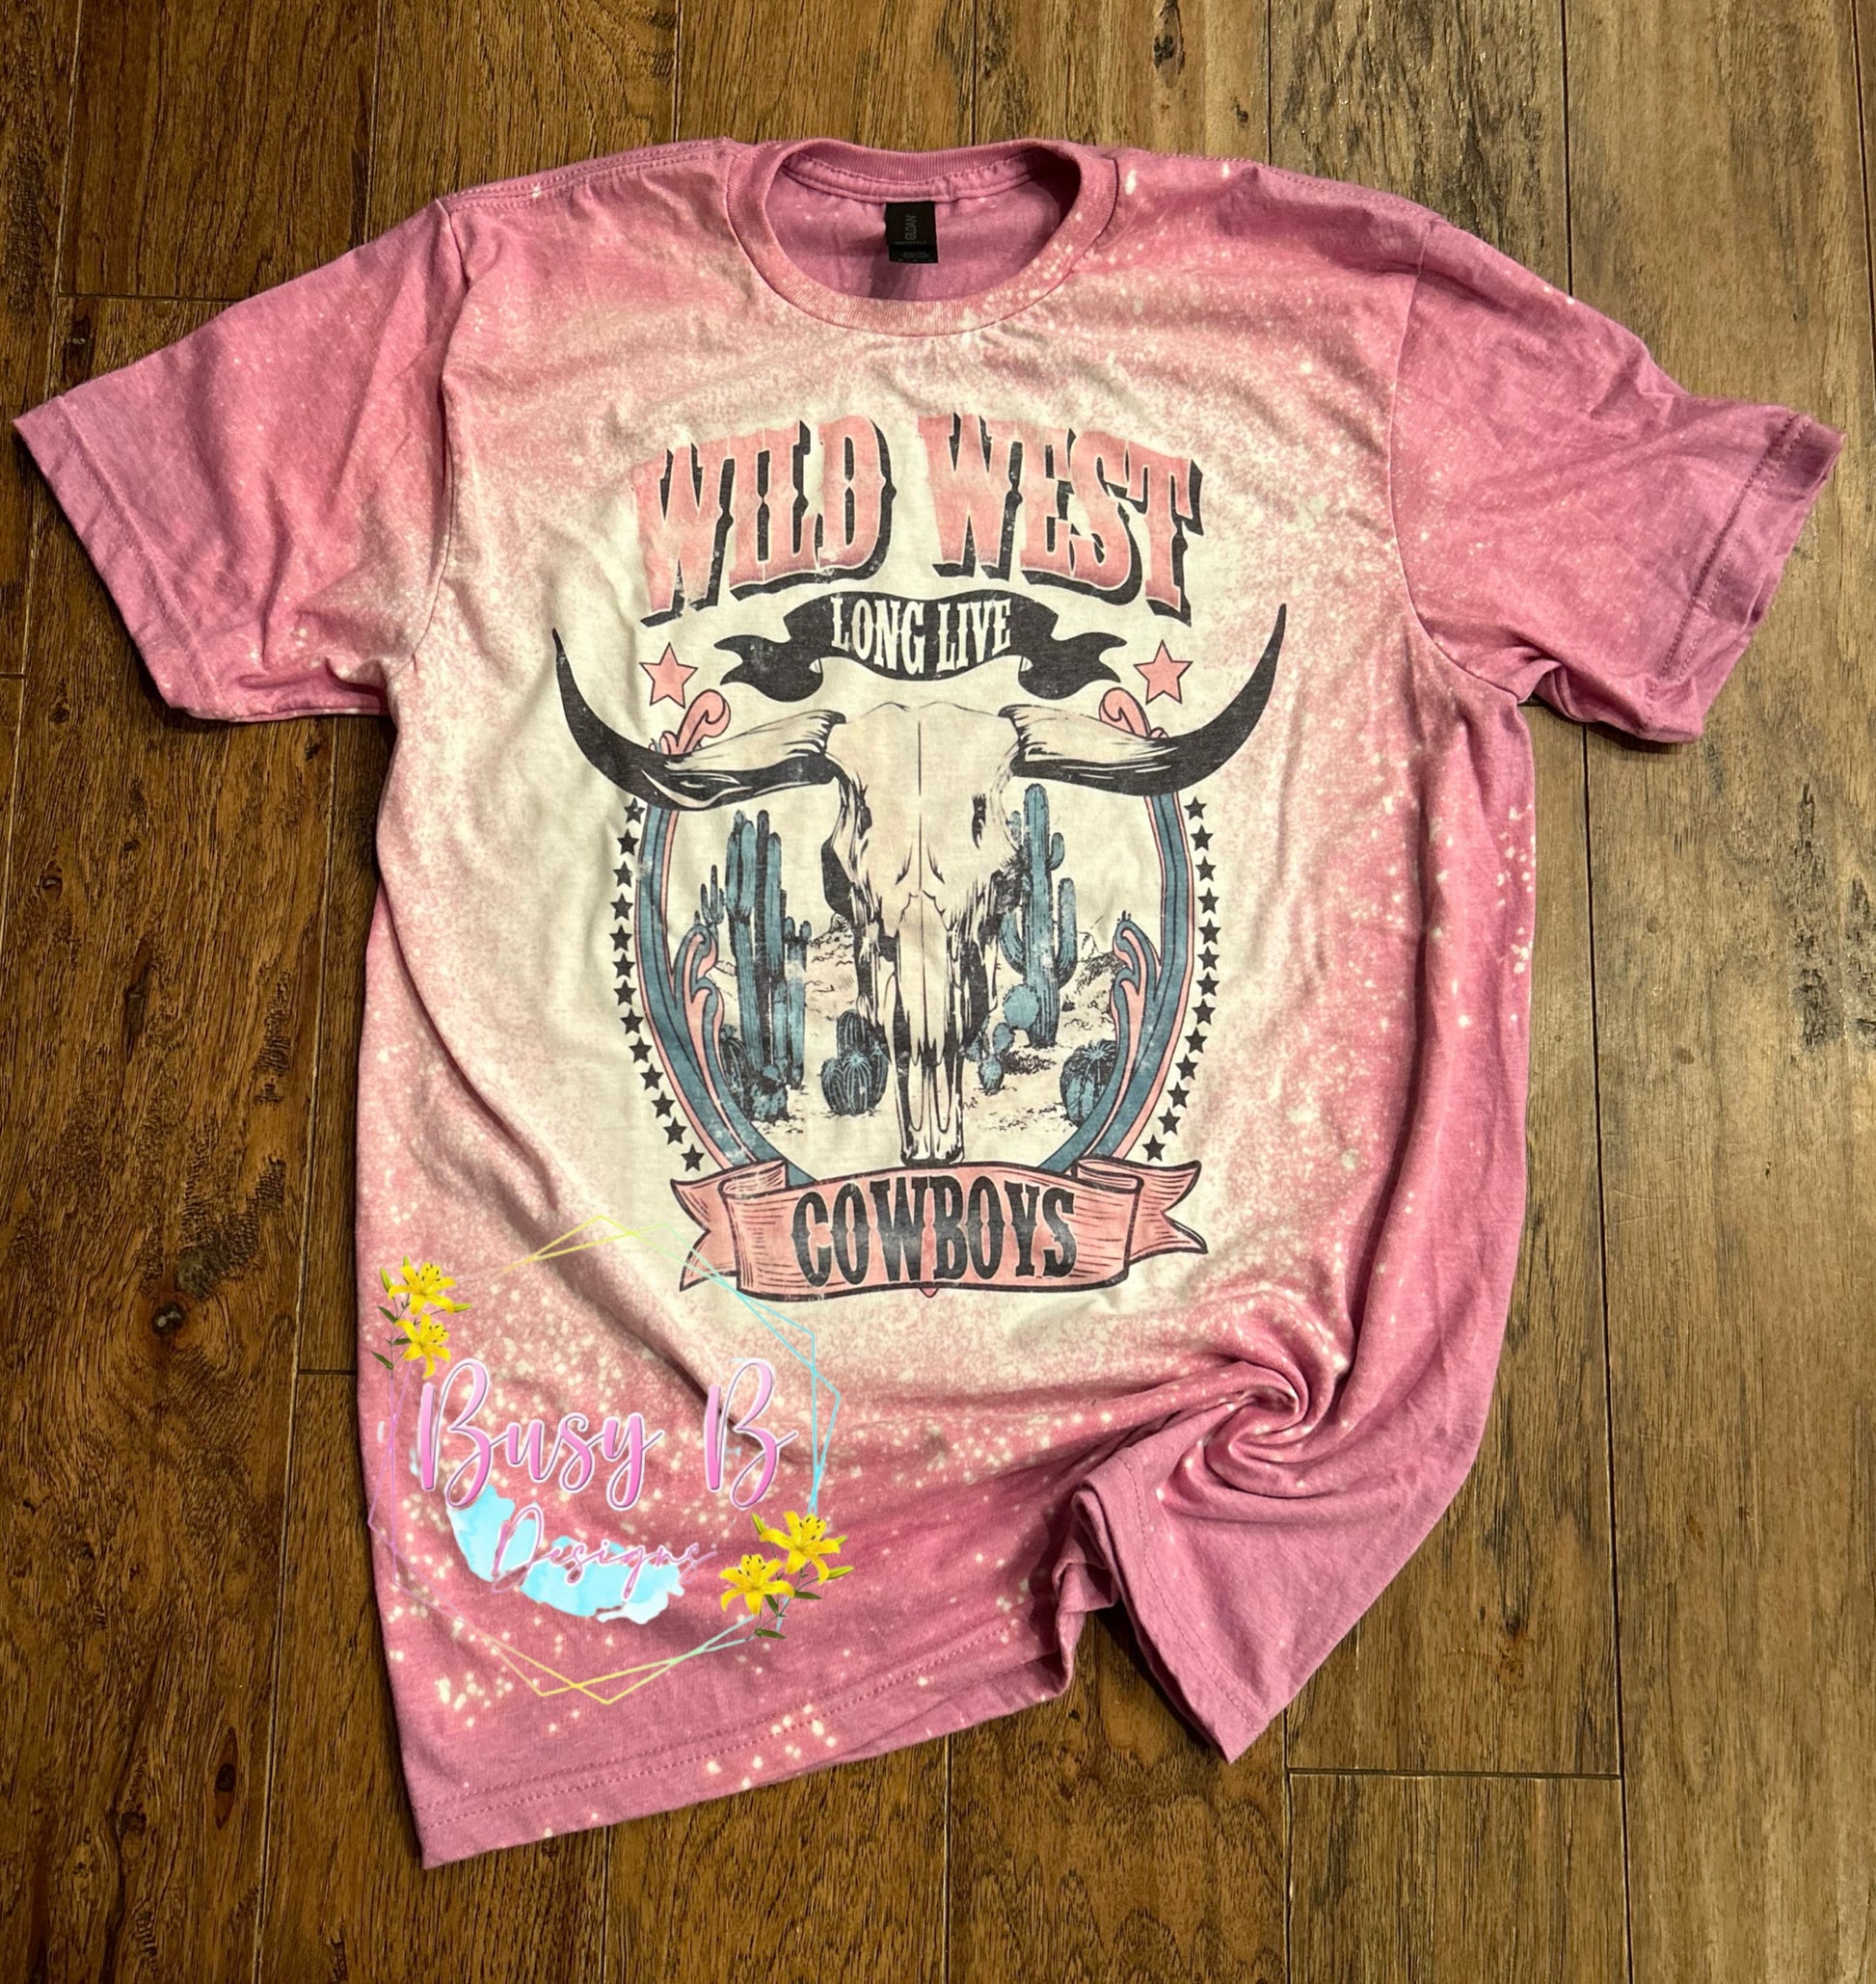 Wild West Long Live Cowboys - Busy B Designs